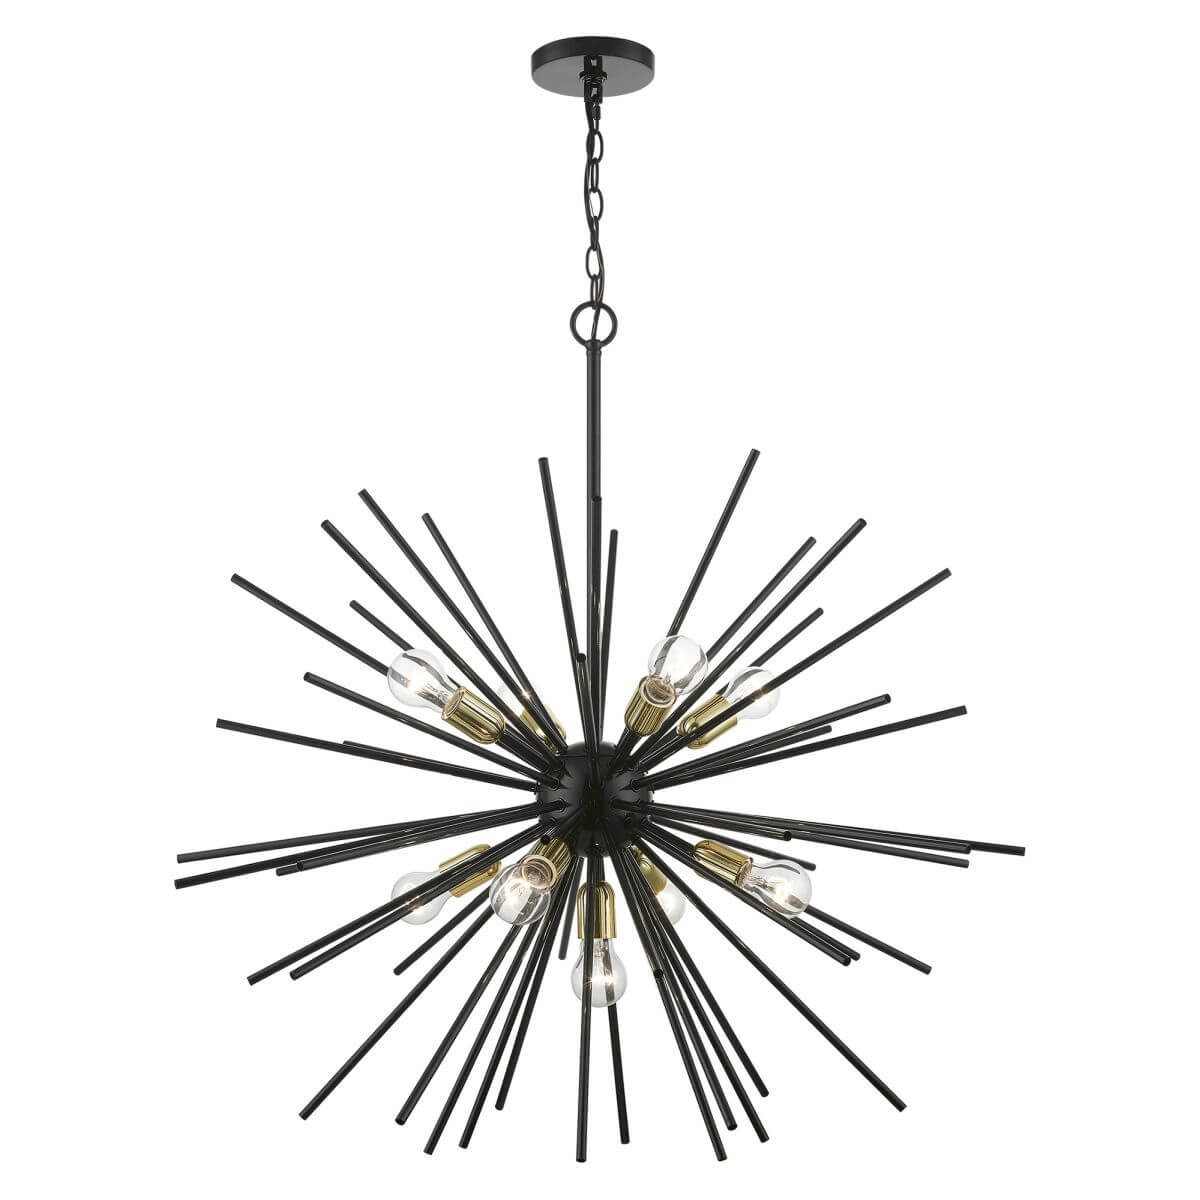 9 Light 34 inch Foyer Chandelier in Shiny Black-Polished Brass Accents with Iron Pipe Rods - 245233